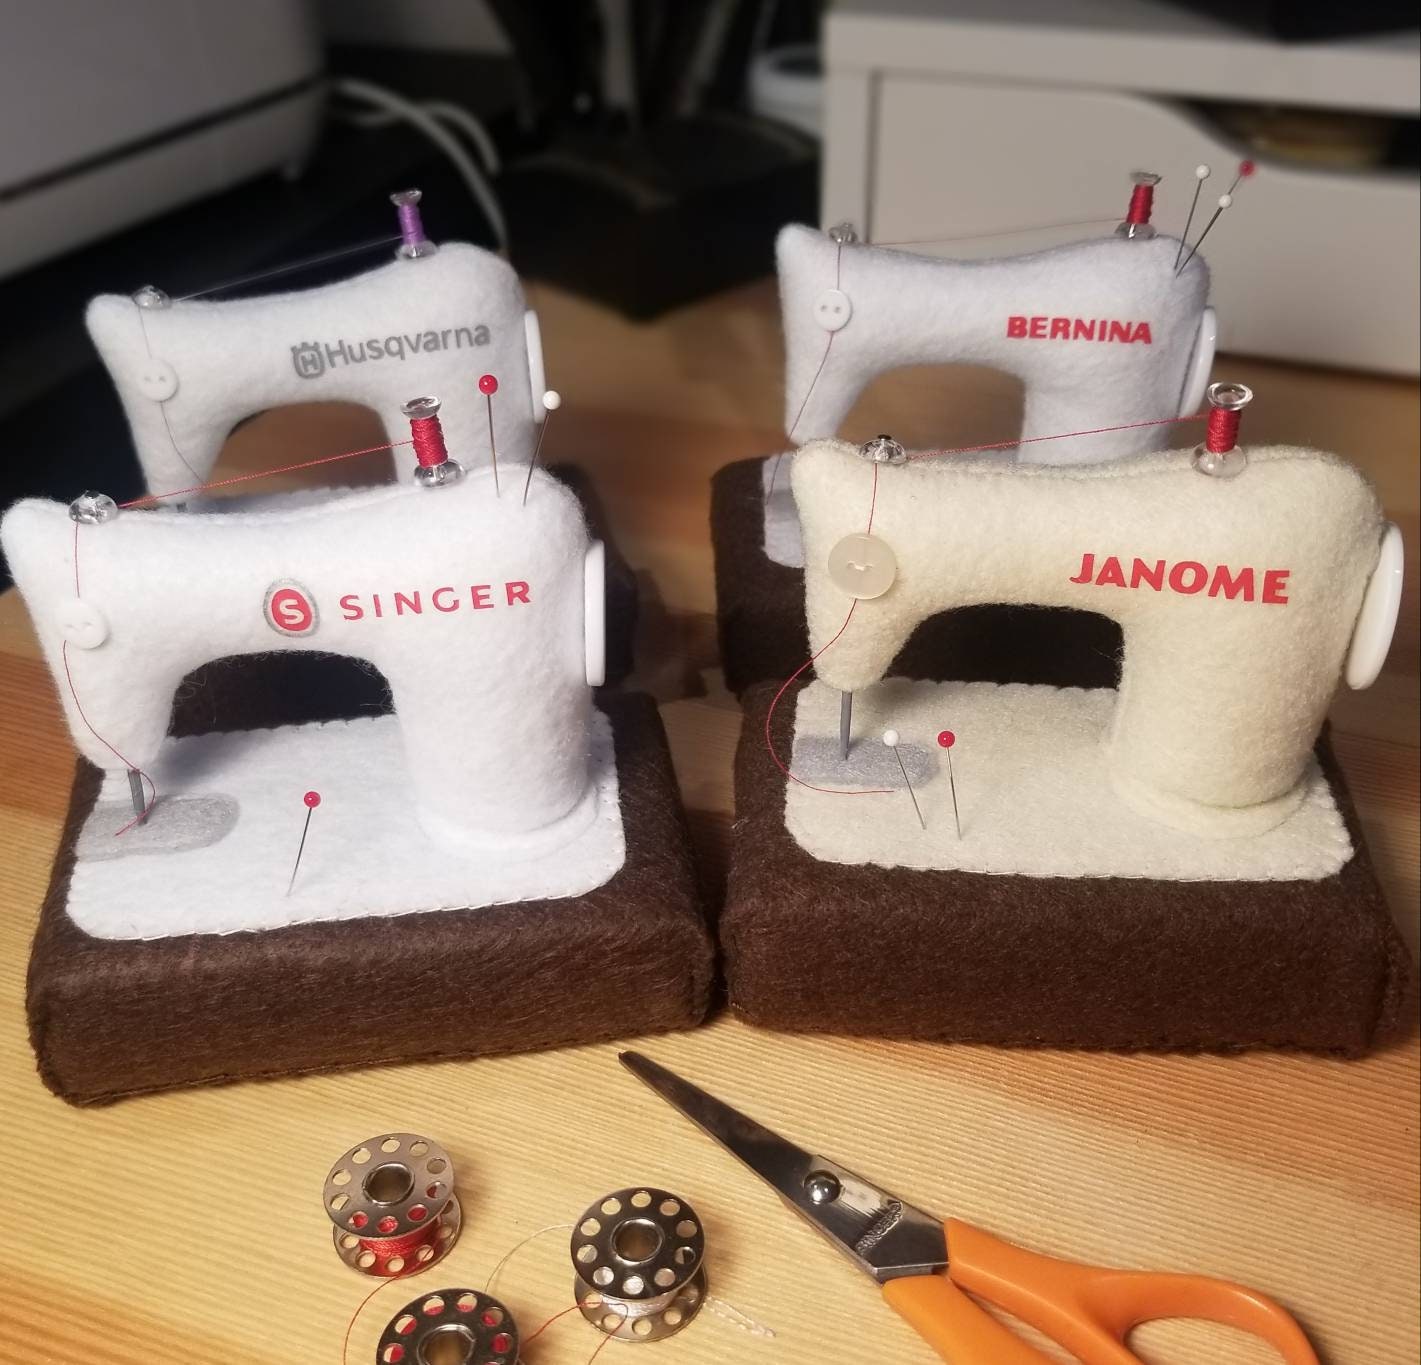 How To Sew A Sewing Machine Pin Cushion Using A Sponge